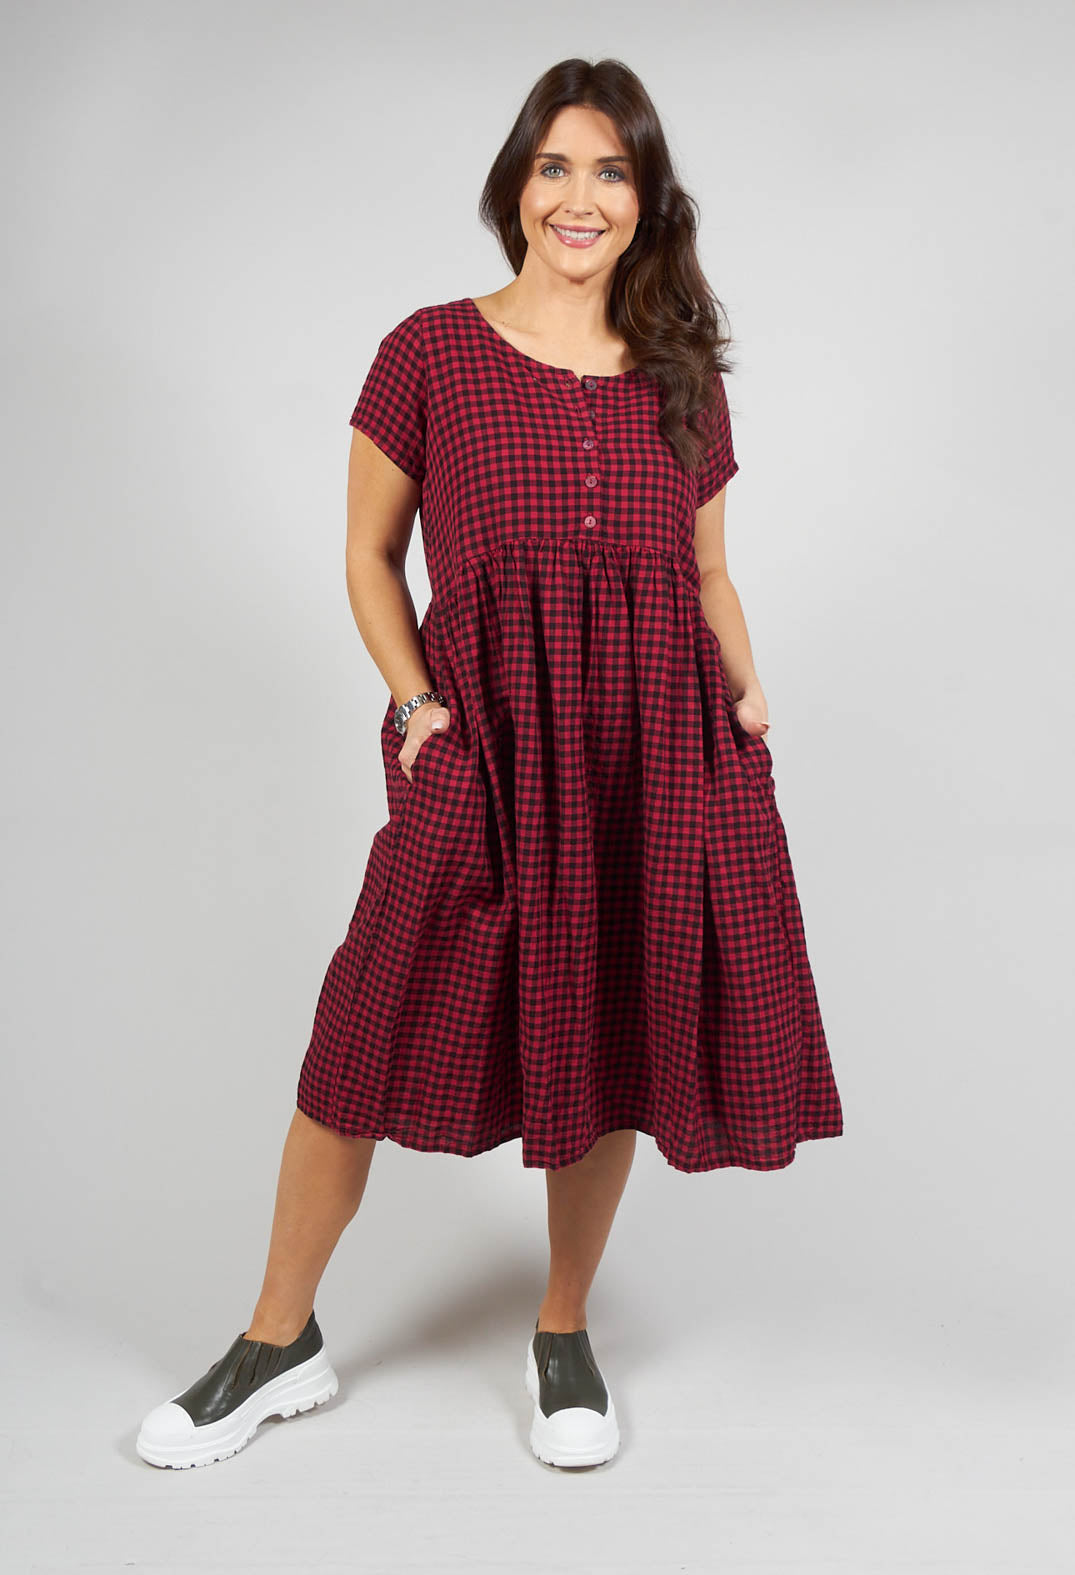 Lobideal Checkered Dress in Himbeer Red and Black Check